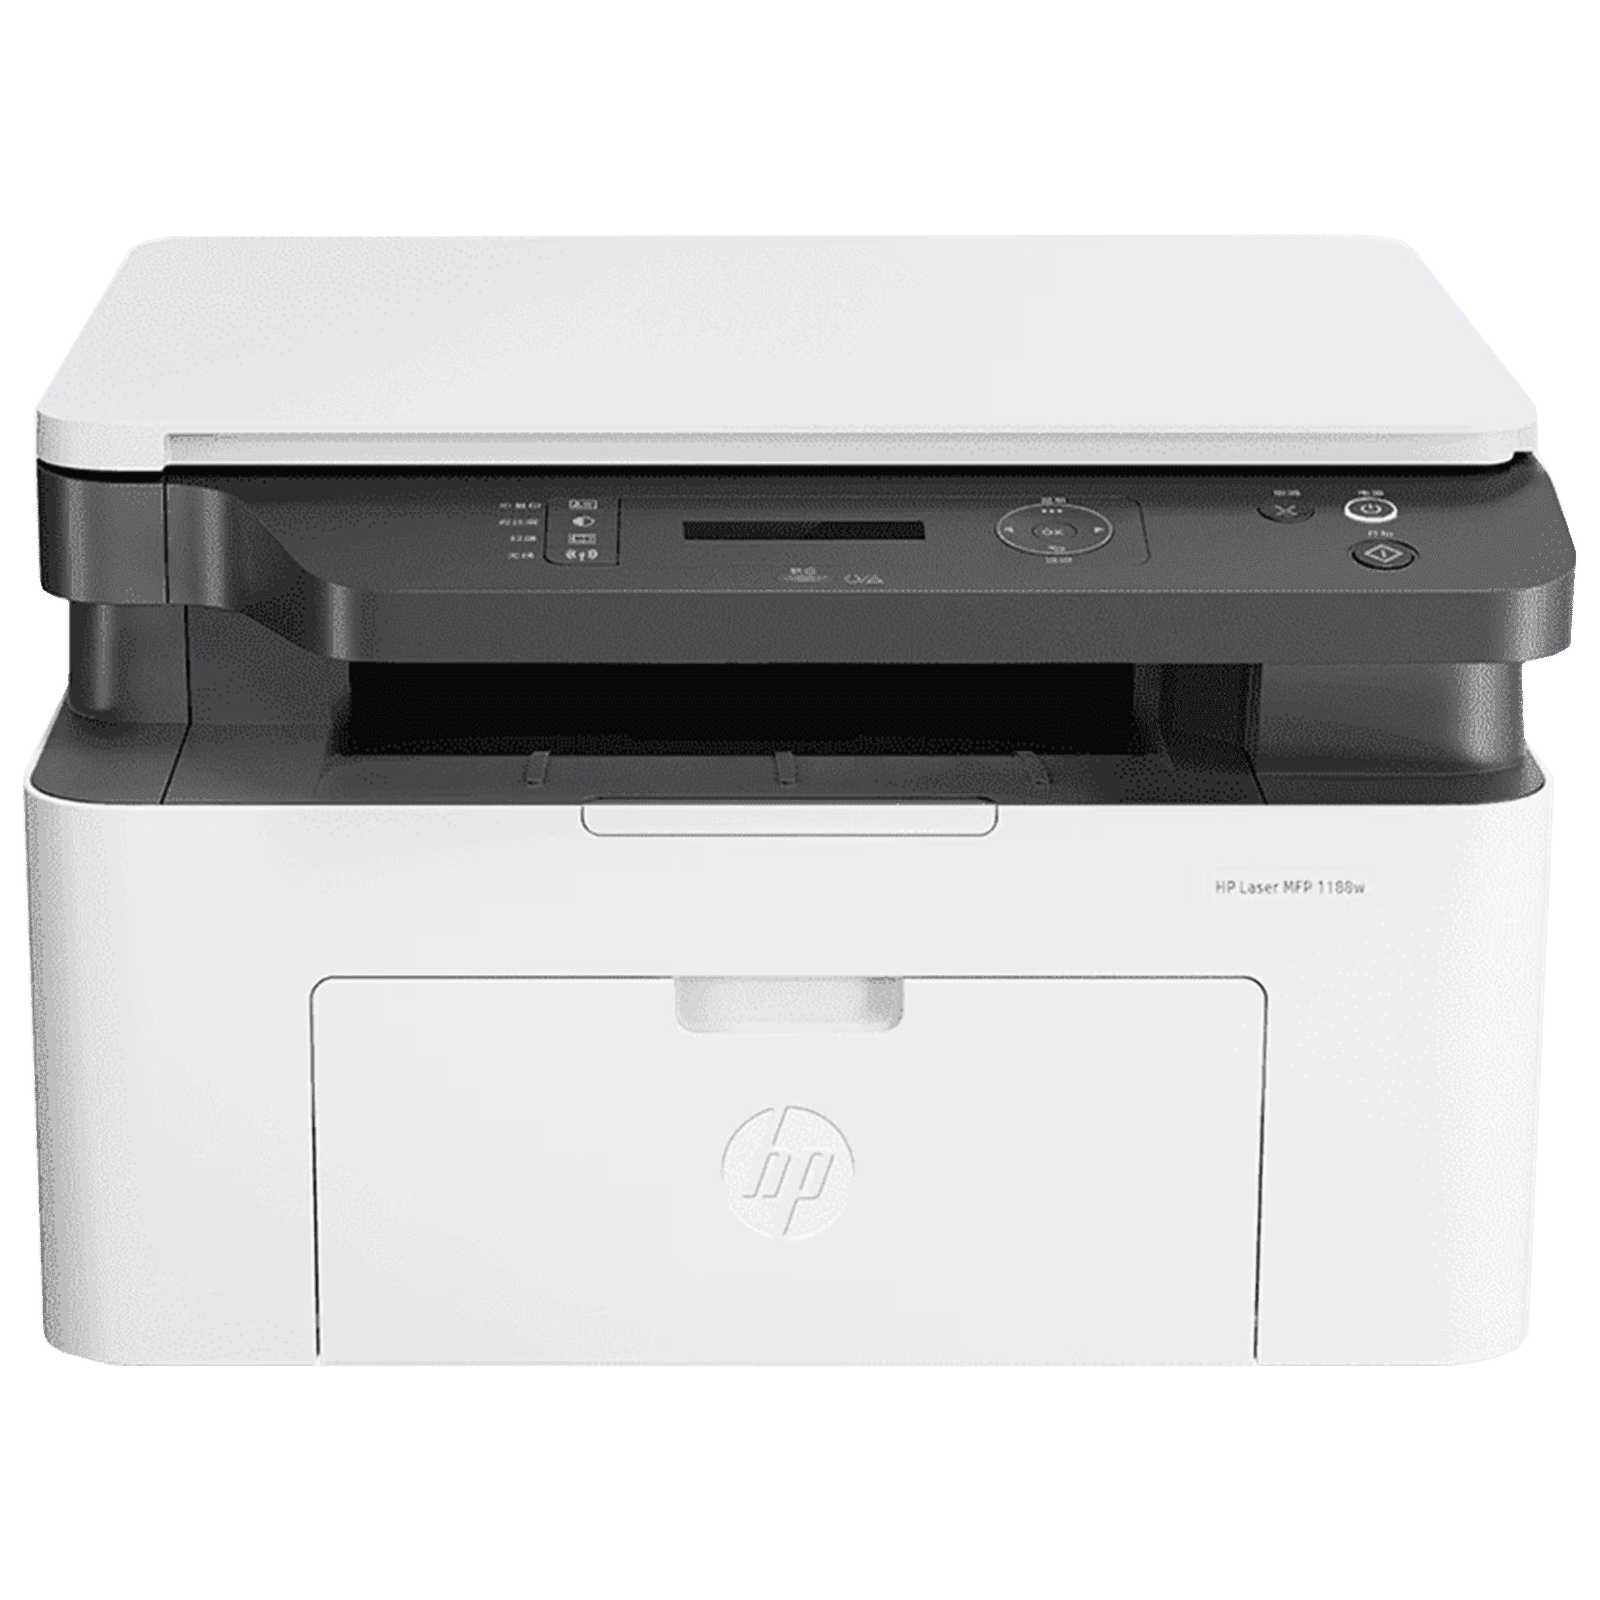 HP Laser MFP 1188w Wireless Black and White All-in-One Laserjet Printer (Manual Duplex Printing, 715A3A, White)